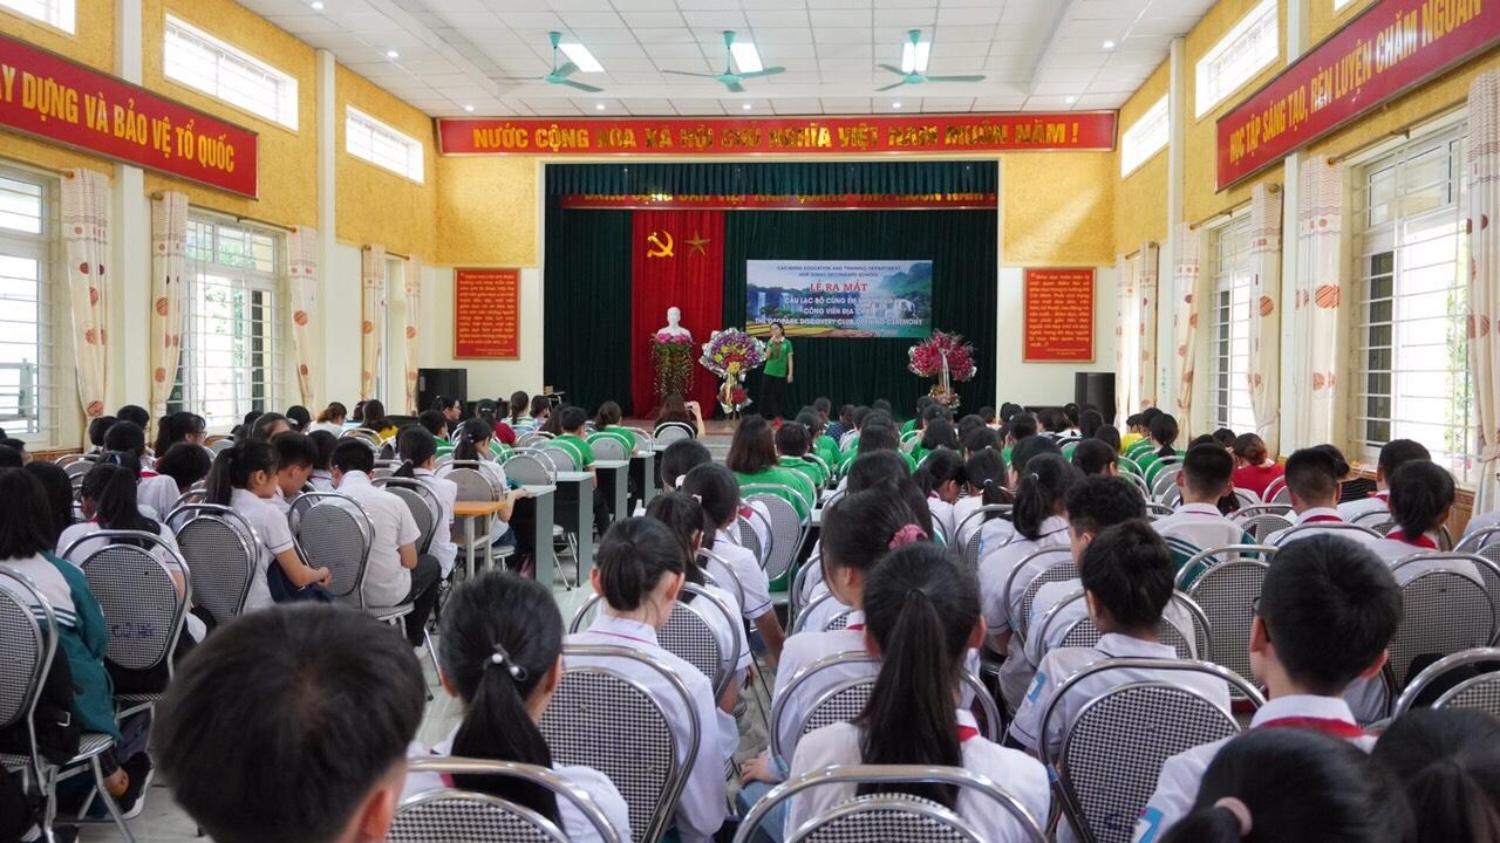 Opening ceremony of “Geopark discovery club” in Hop Giang secondary school